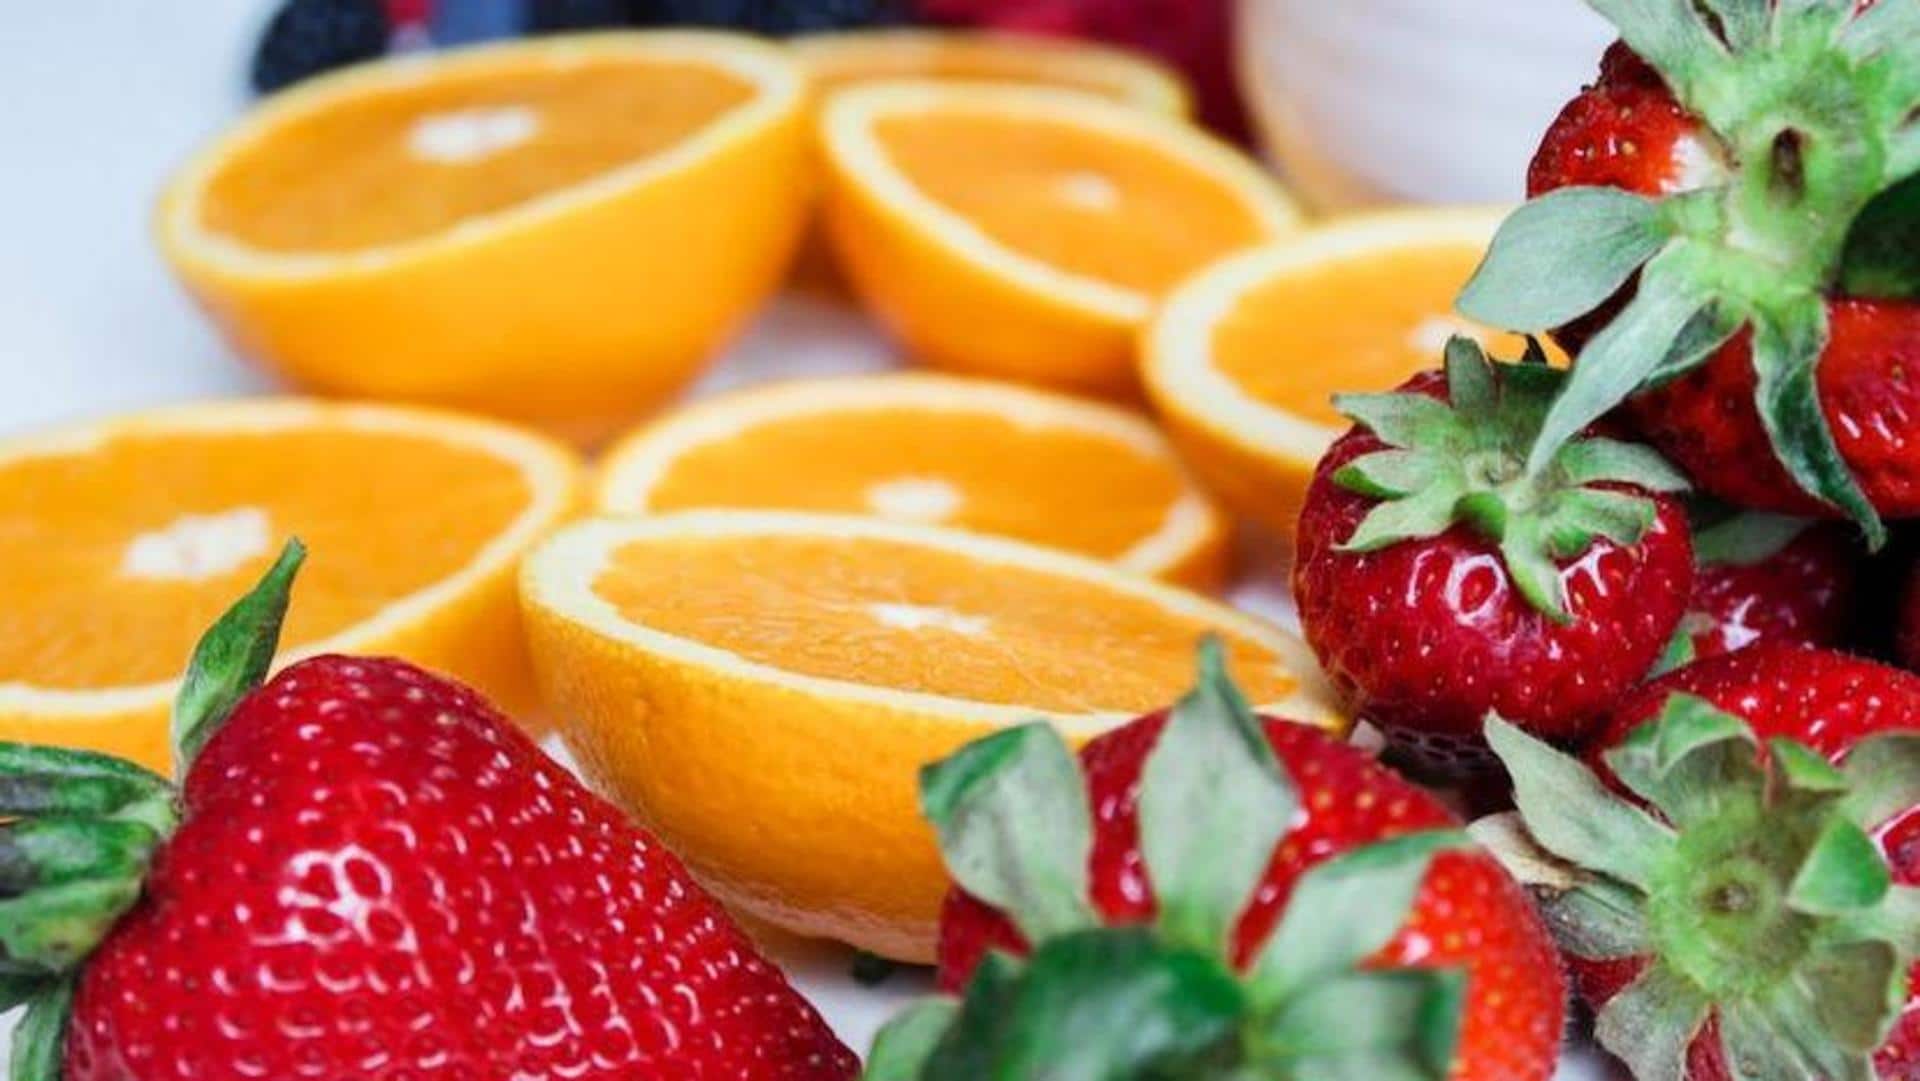 Avoid these common mistakes when eating fruits